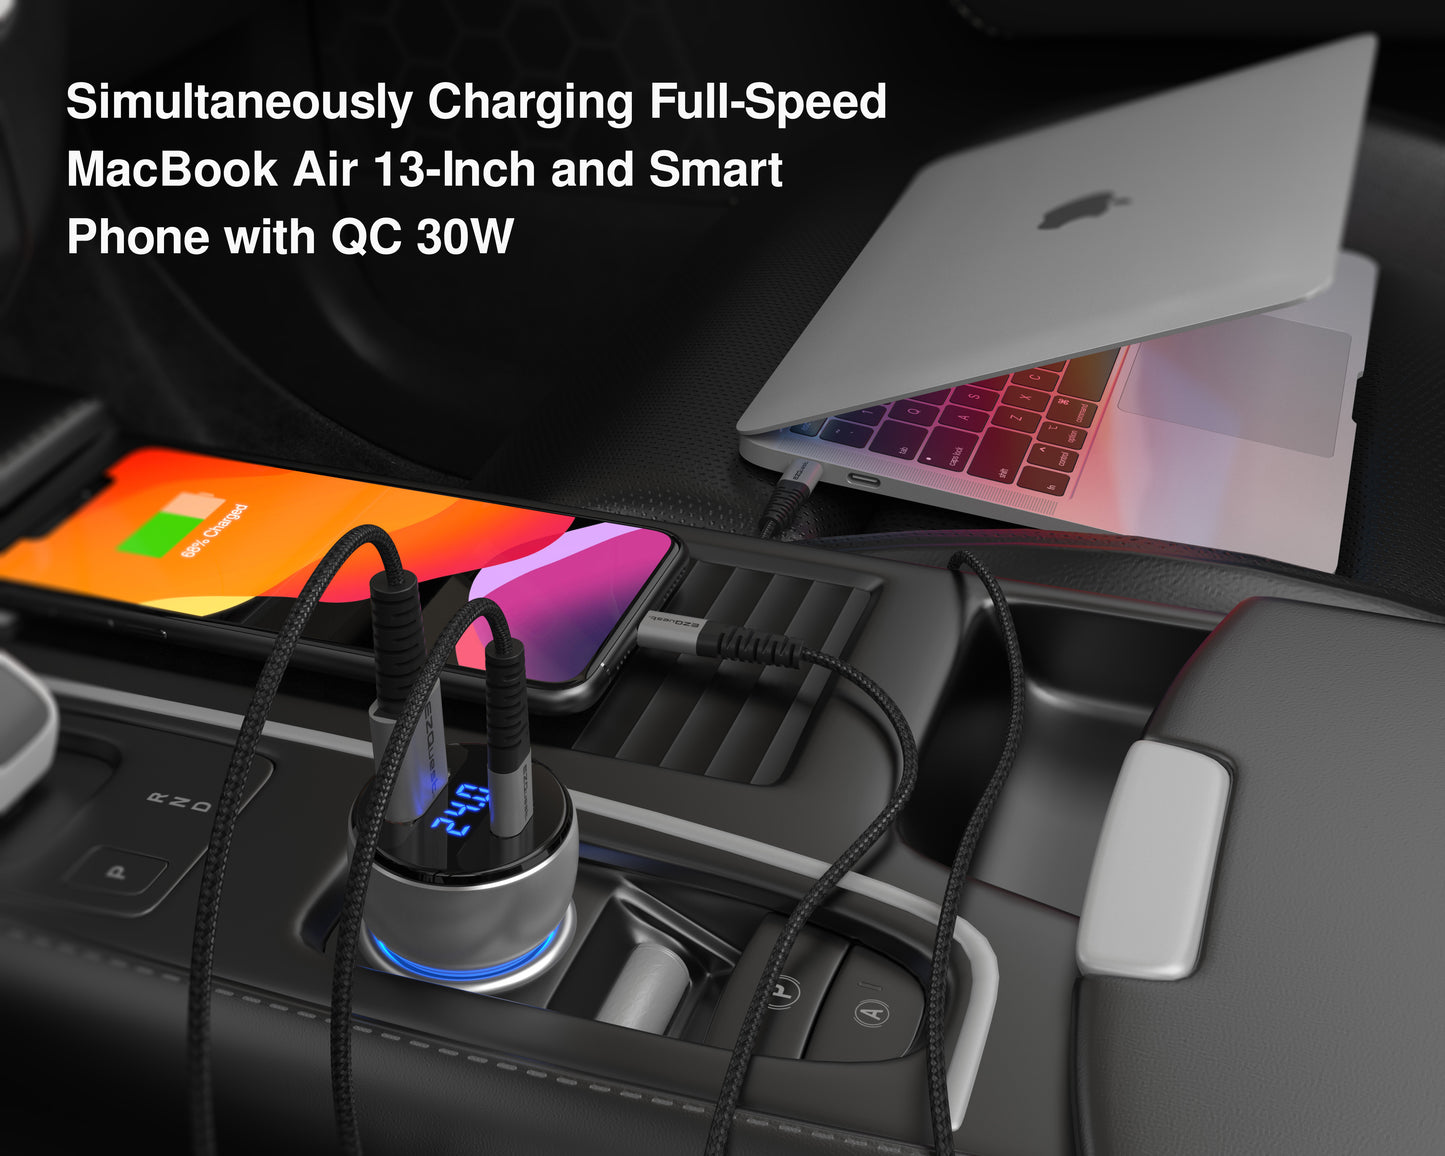 EZQuest UltimatePower Dual Port USB 3.0 and USB-C 66W Car Charger w/ Display